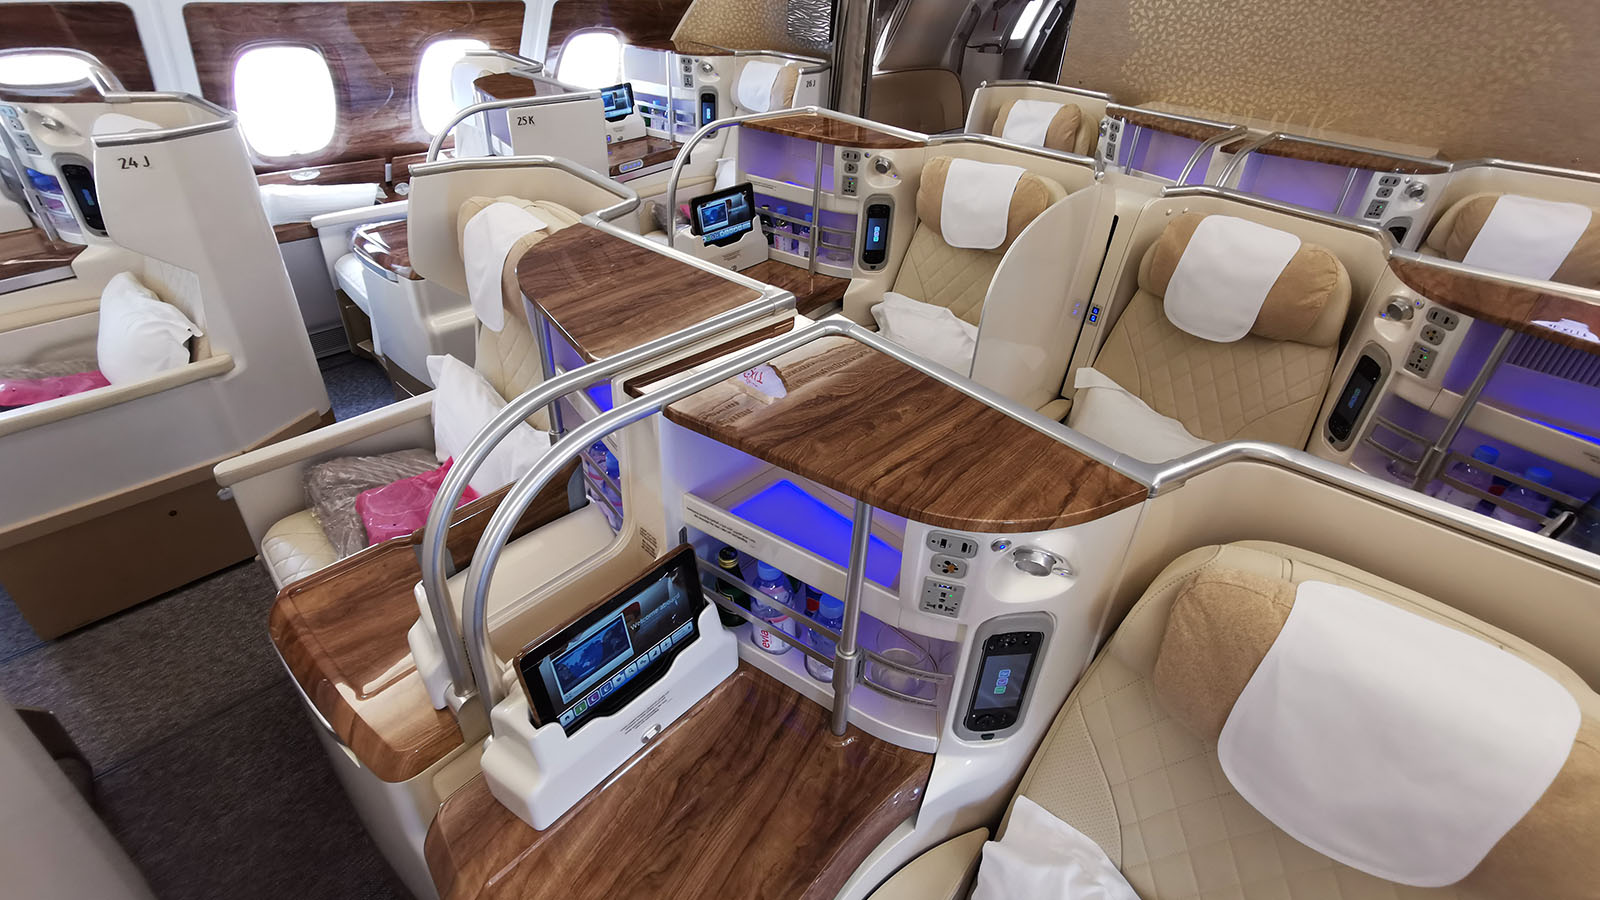 Business Class centre seats on Emirates' Airbus A380 from Melbourne